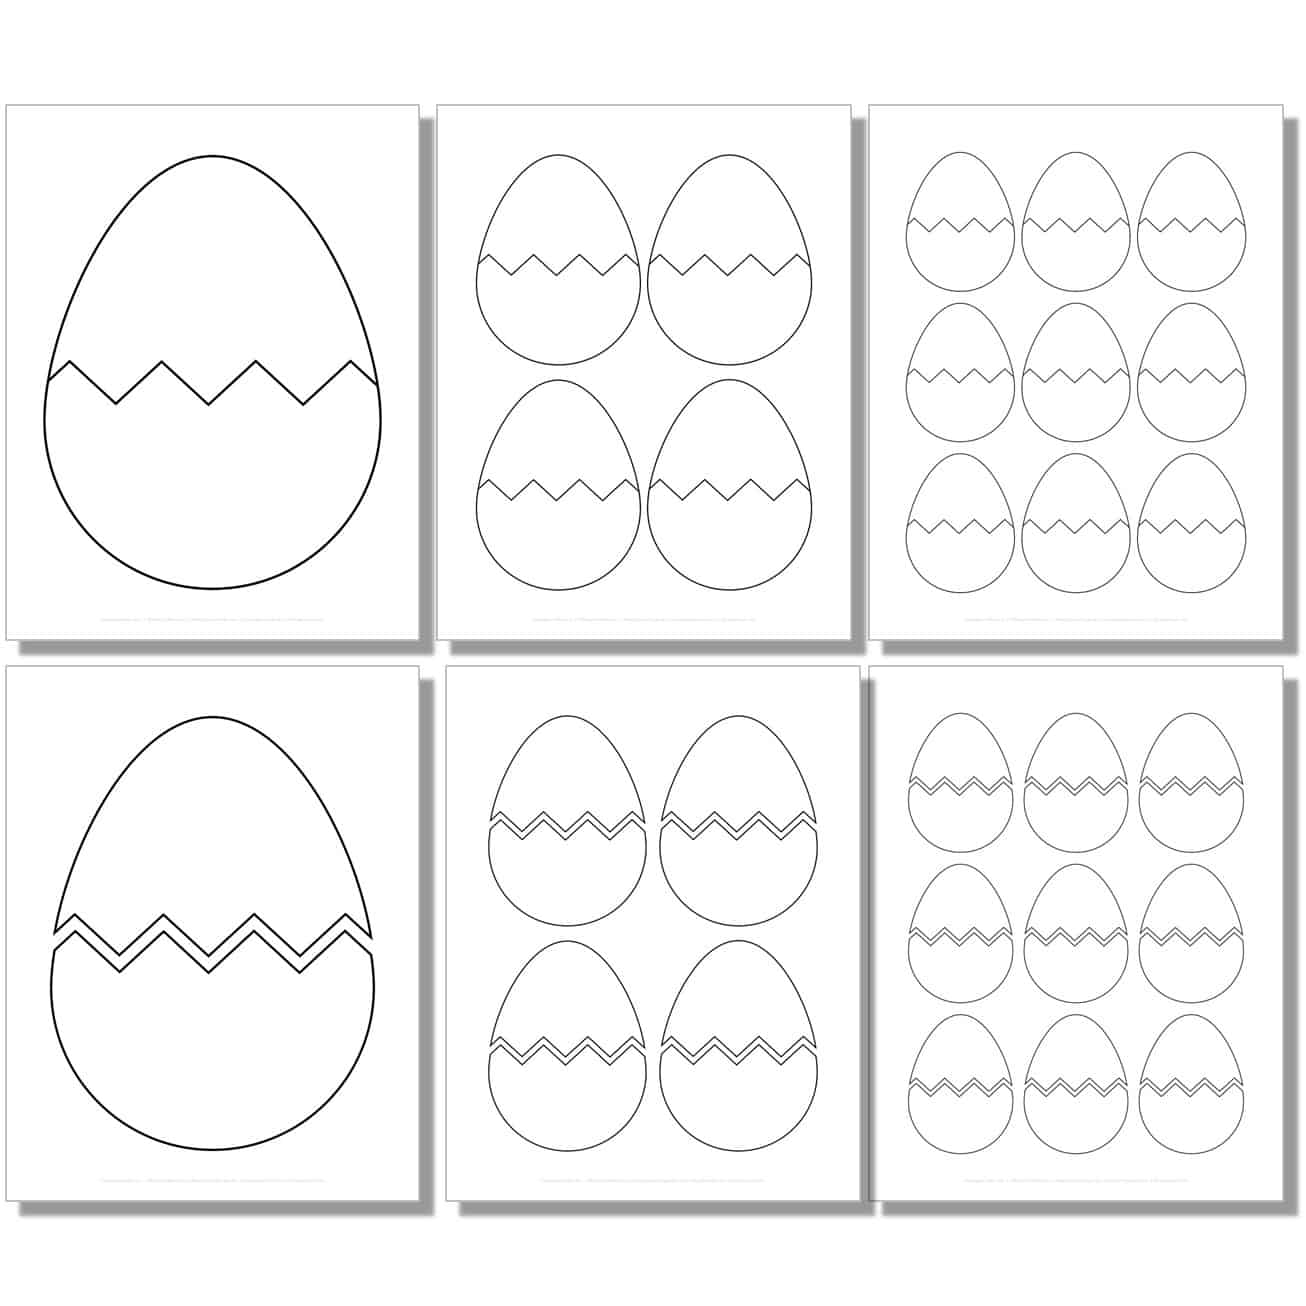 large, medium, small middle cracked easter egg templates, outlines, stencils.